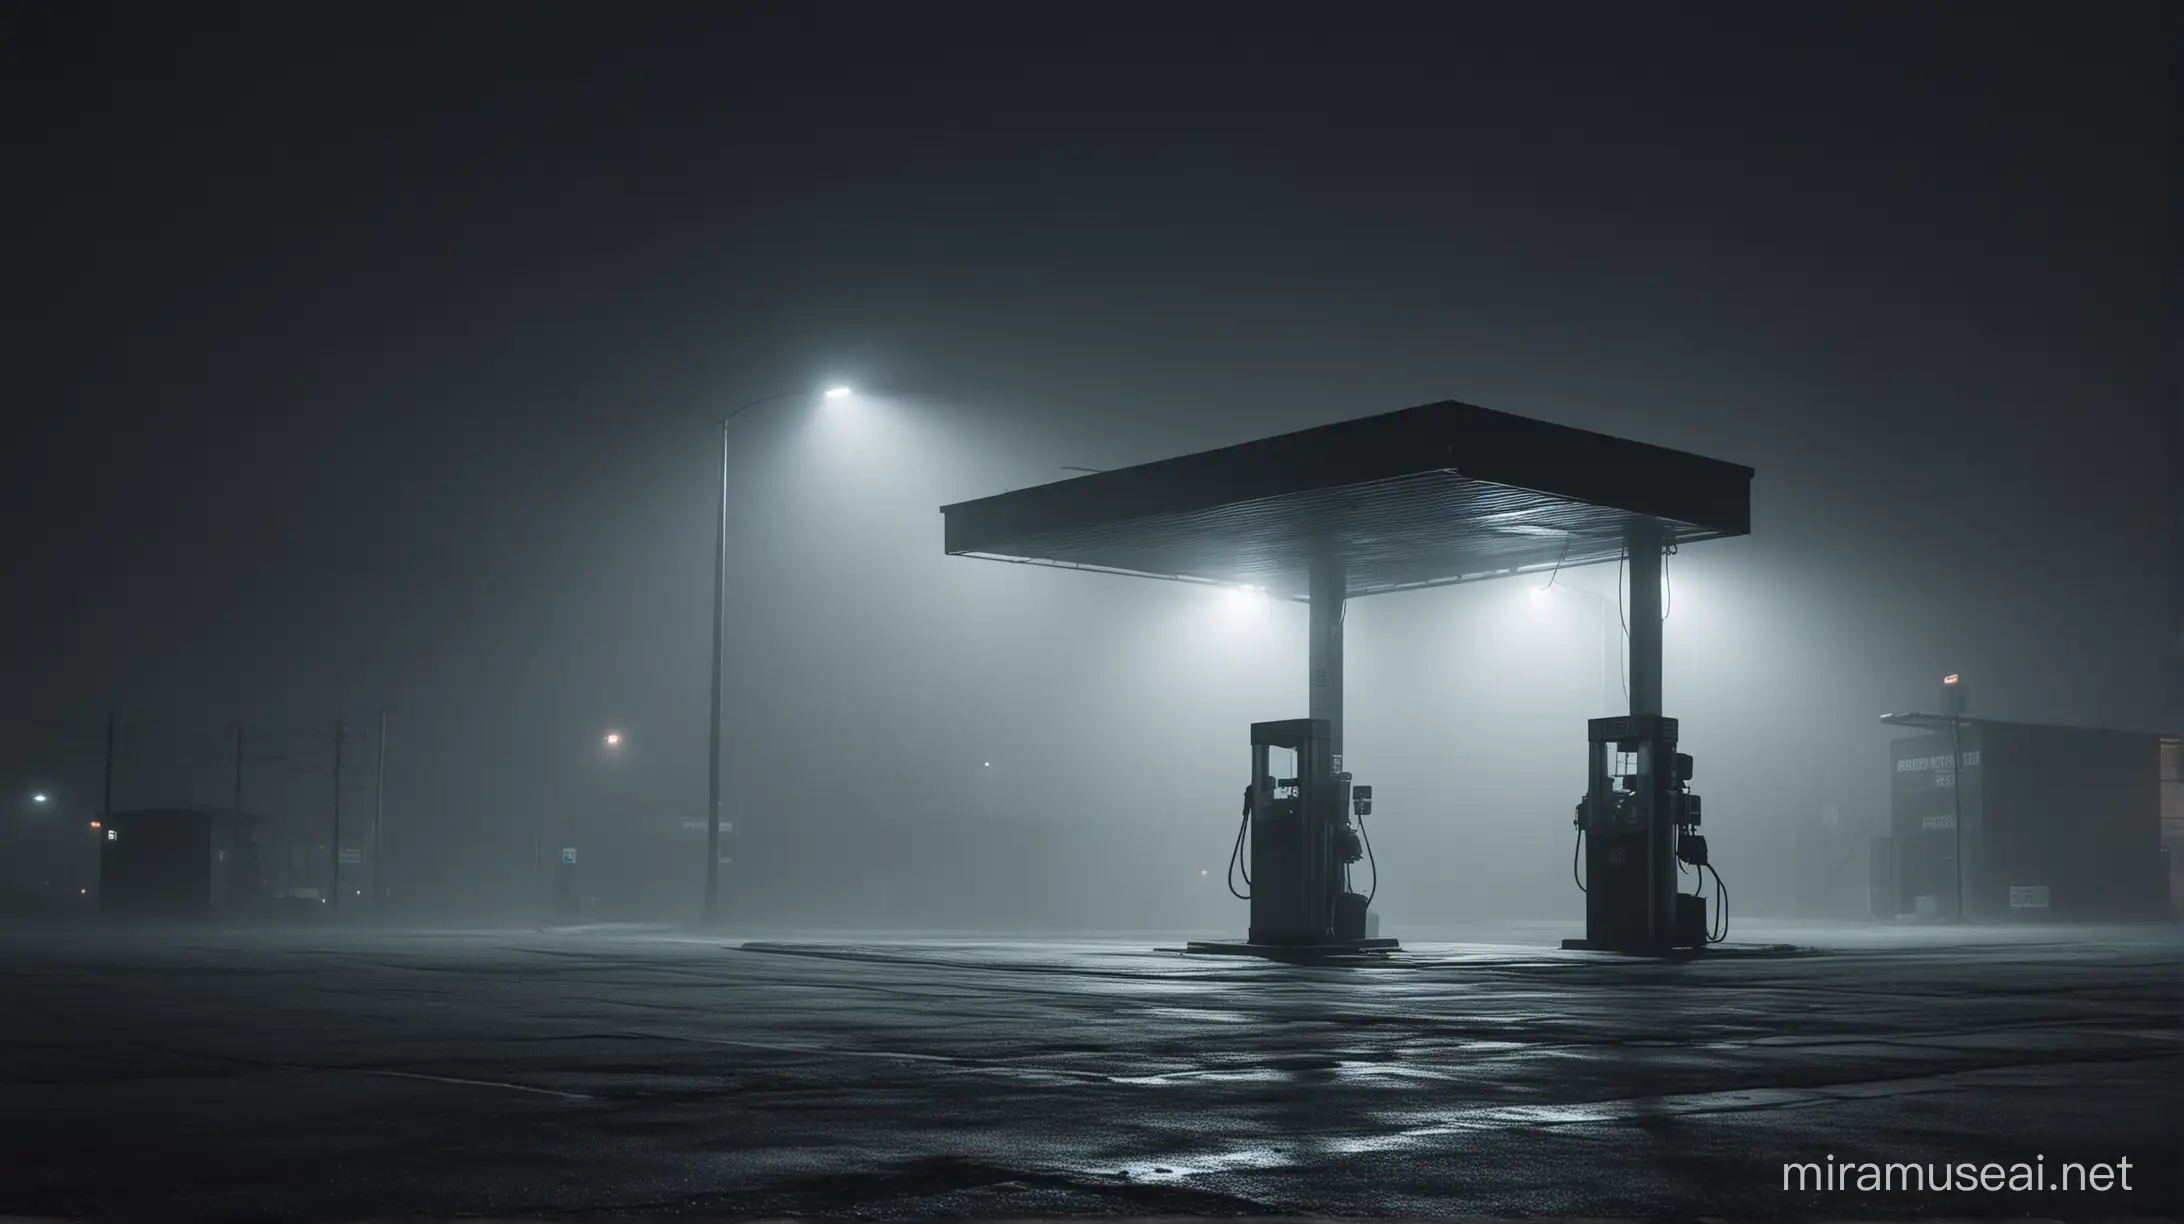 Eerie Gas Station at Night Mystery and Abandonment in the Fog